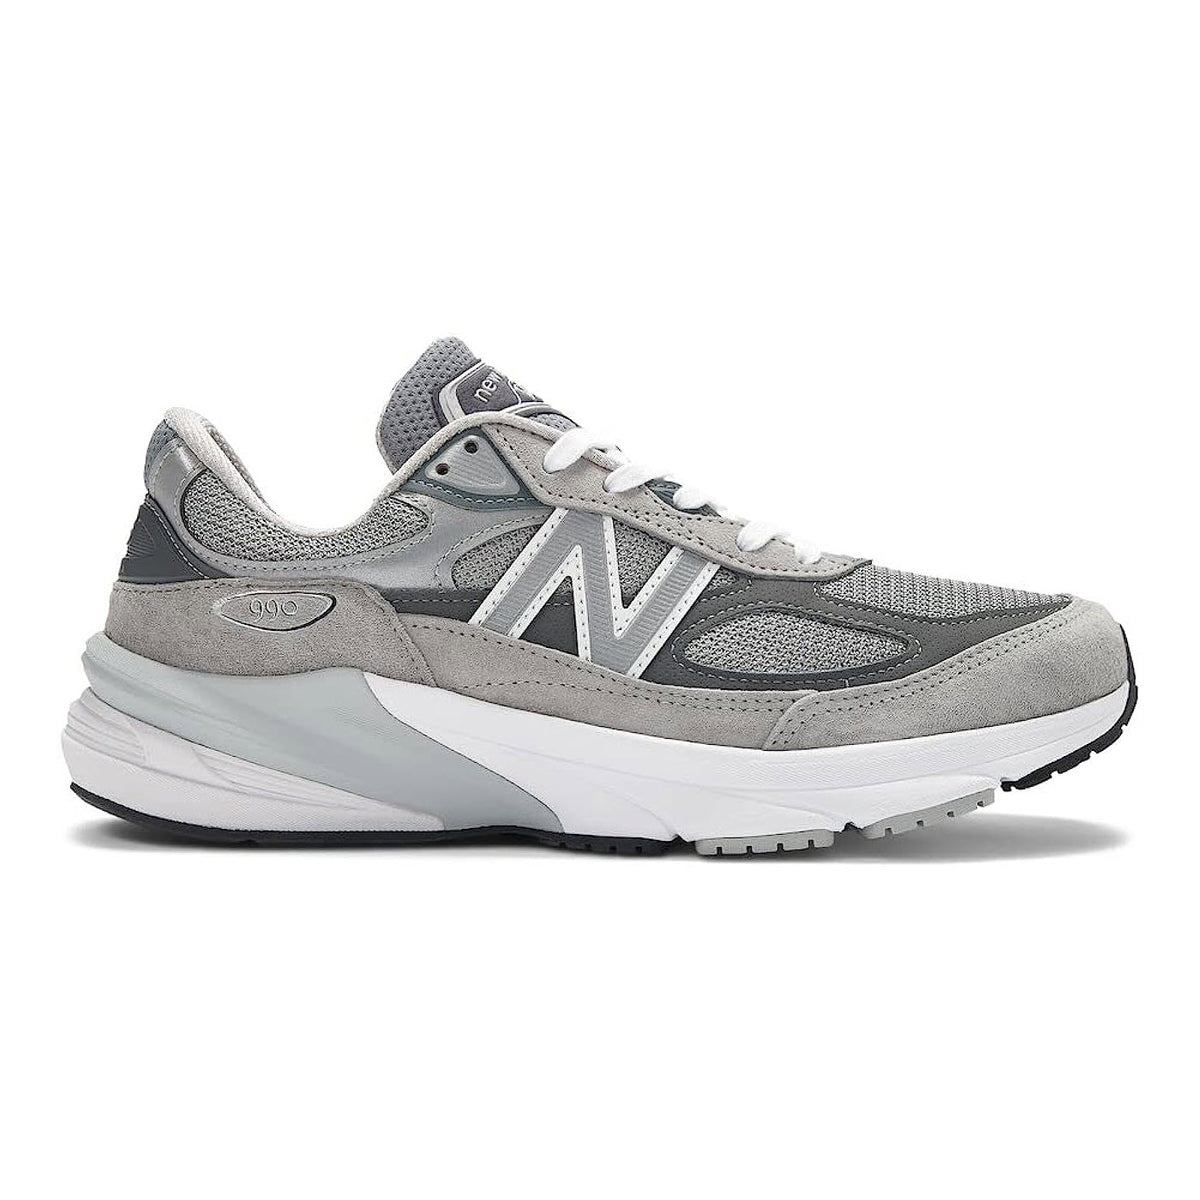 A New Balance 990 V6 Grey running shoe with a visible &quot;n&quot; logo on the side.